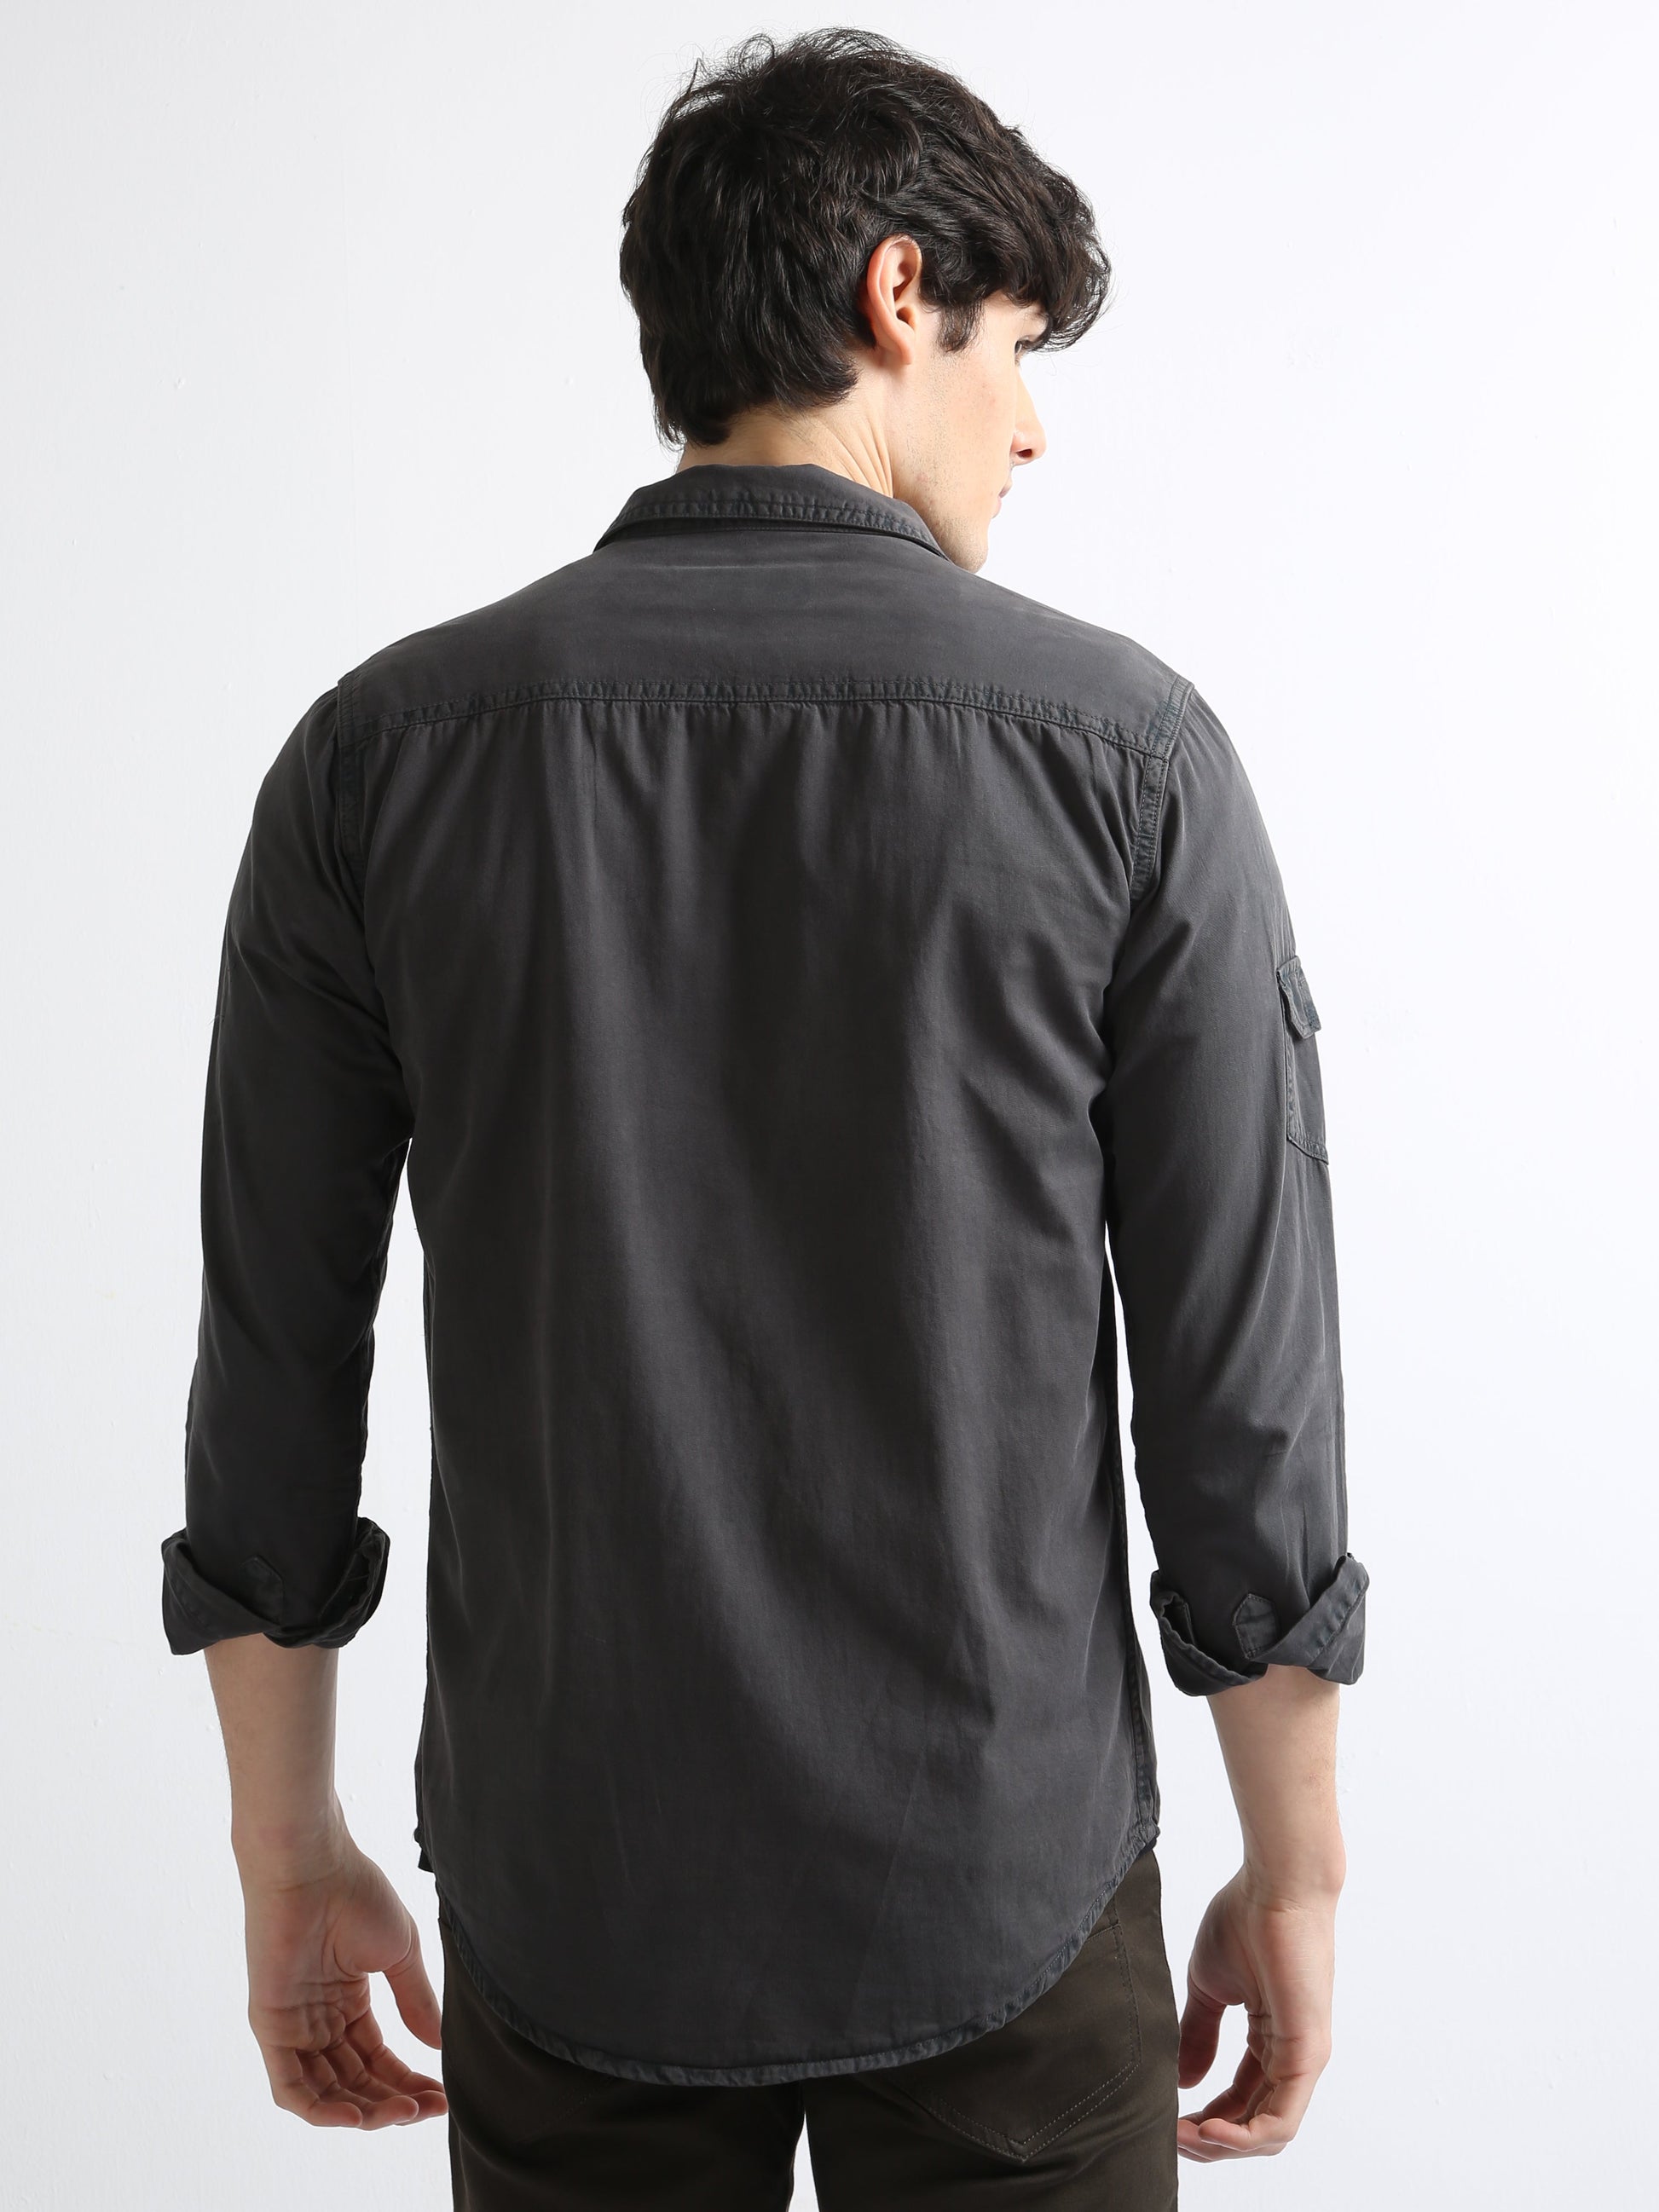 Buy Pull Over Fashionable Shirt With Sleeve Pocket Online.